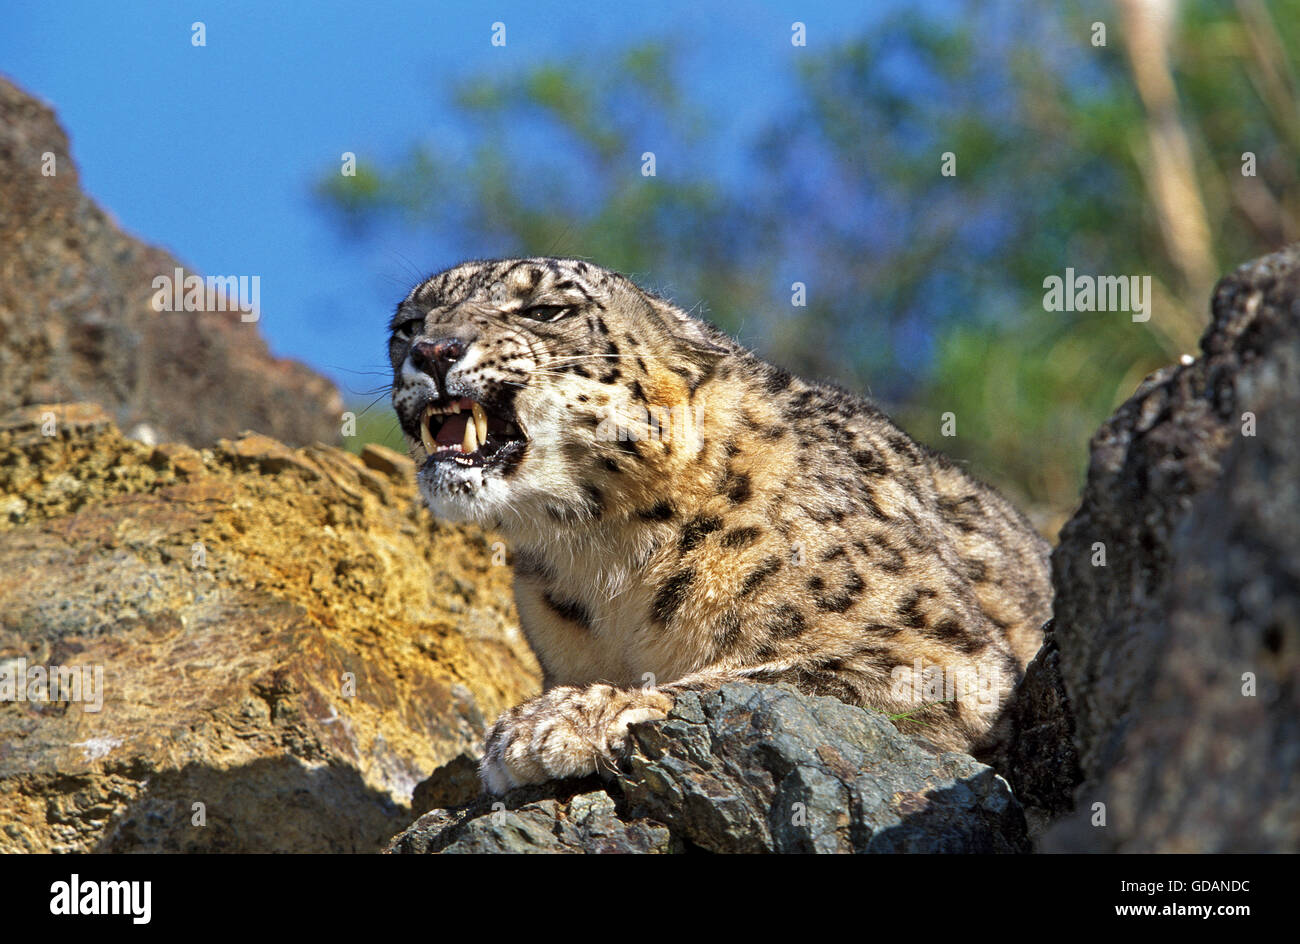 Snow Leopard or Ounce, uncia uncia, Snarling Stock Photo